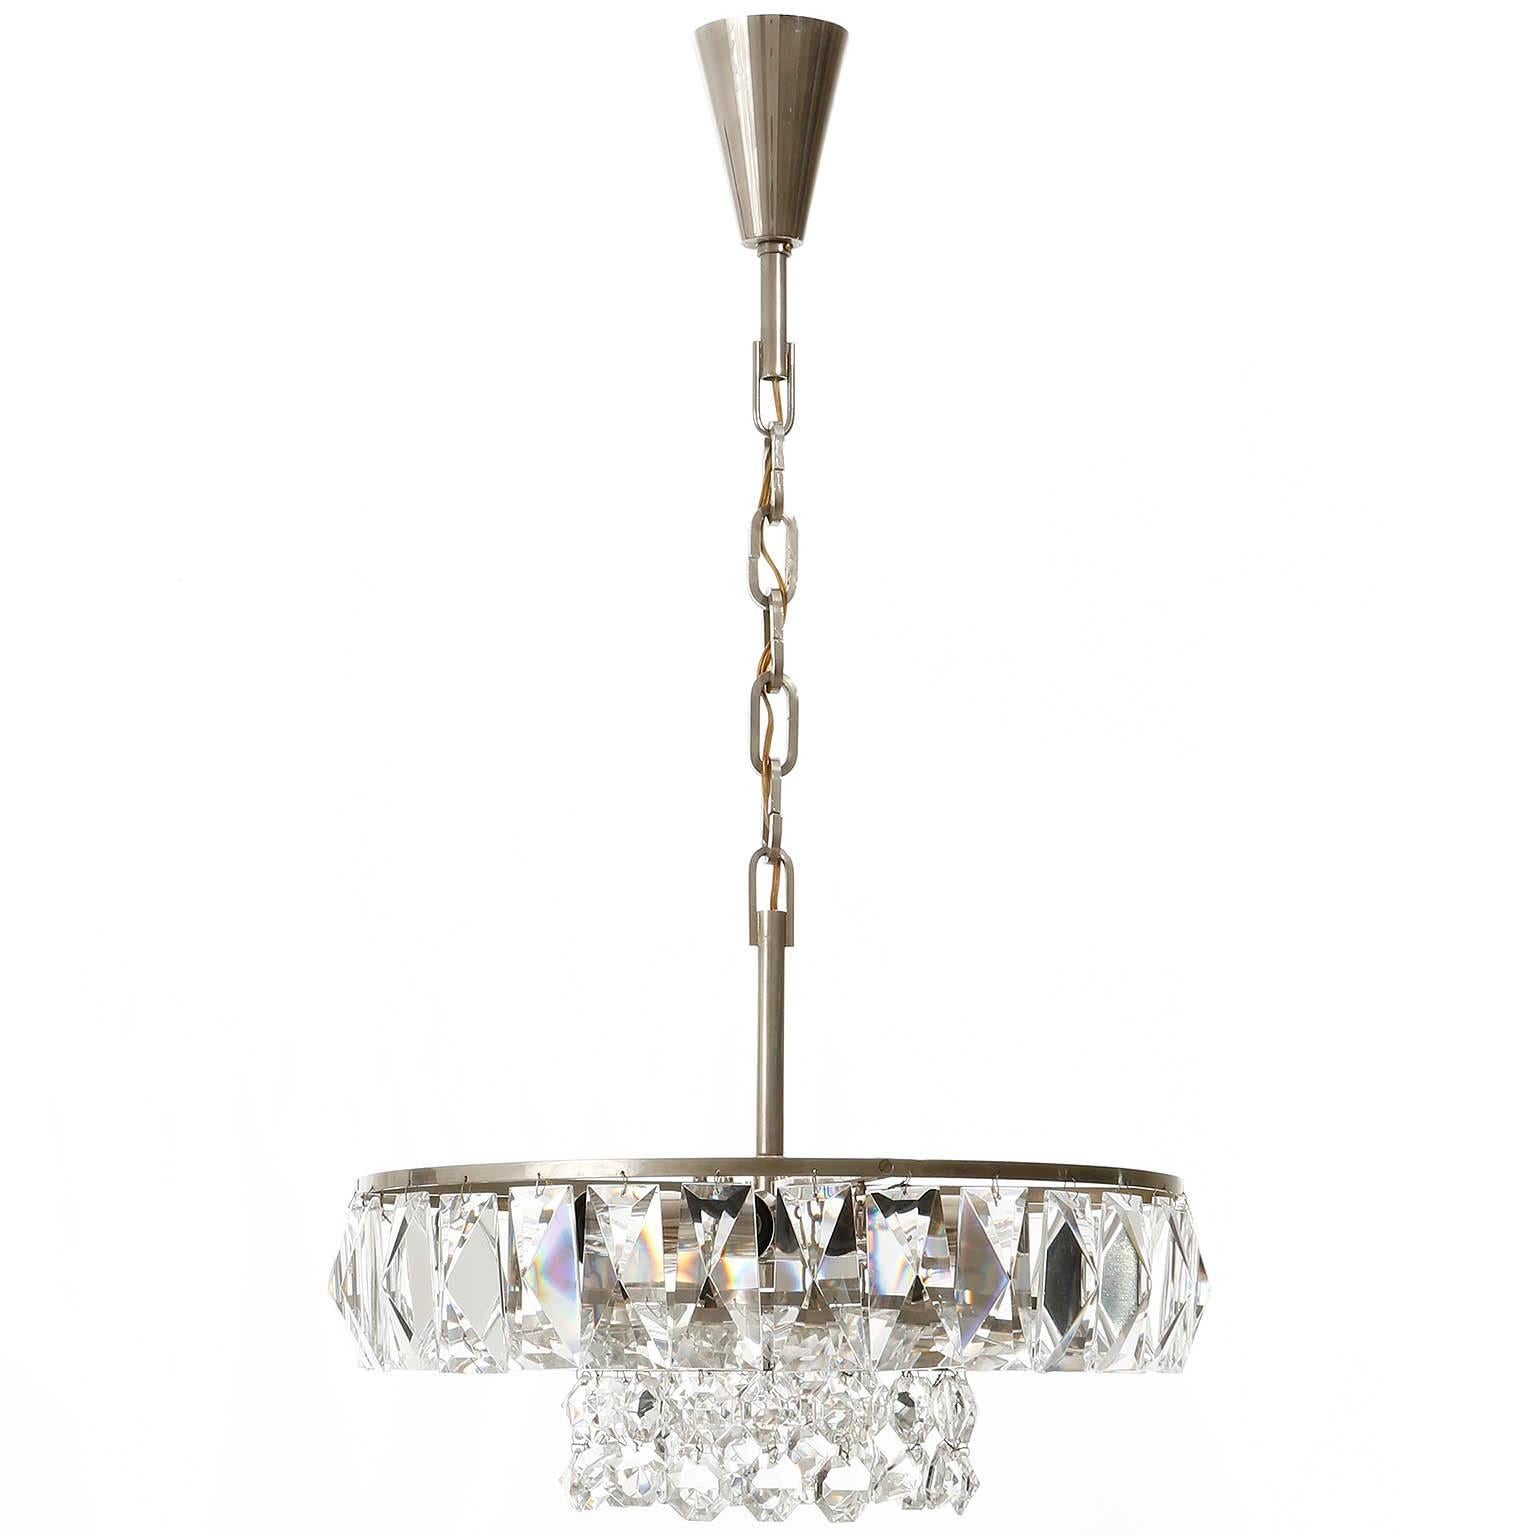 Very beautiful and high quality Austrian chandelier by Bakalowits & Söhne from the 1960s. It is made of hand cut diamond shaped crystals, large rhomb shaped crystals and a nickel (chrome) plated frame. 

The large rhomb crystals have a